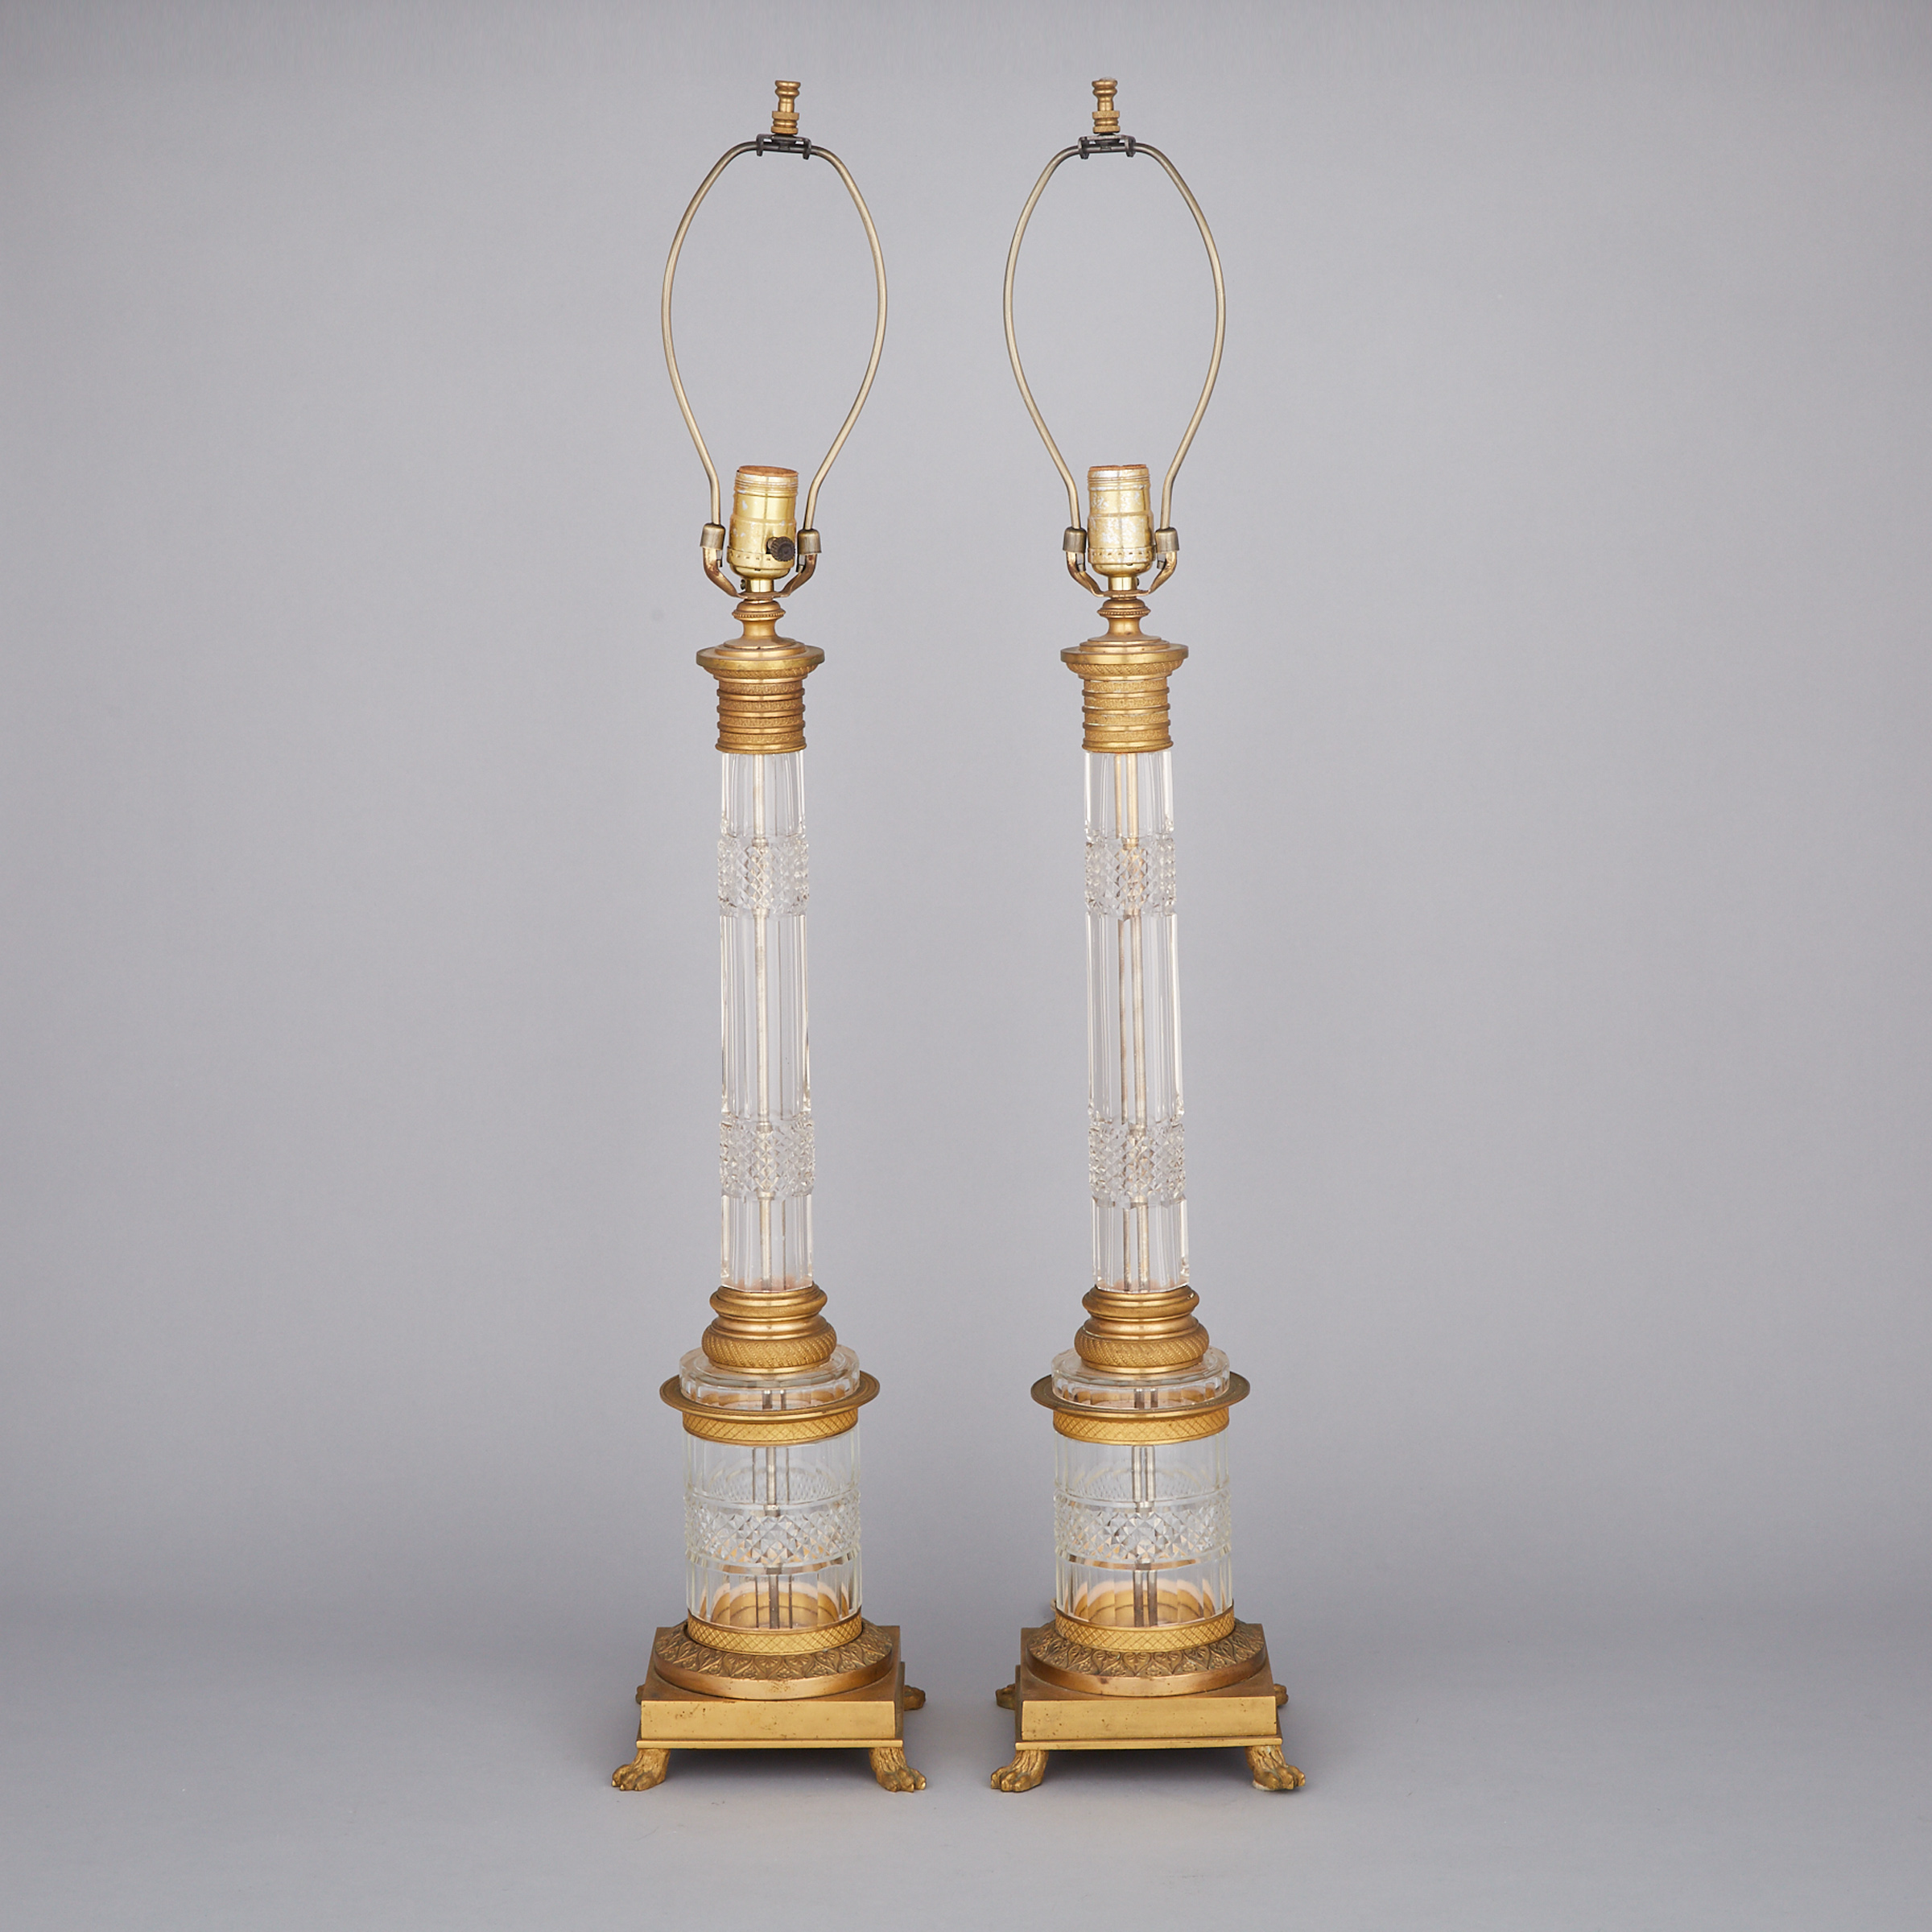 Pair of Austrian Ormolu Mounted Cut Glass Column Form Table Lamps, early 20th century